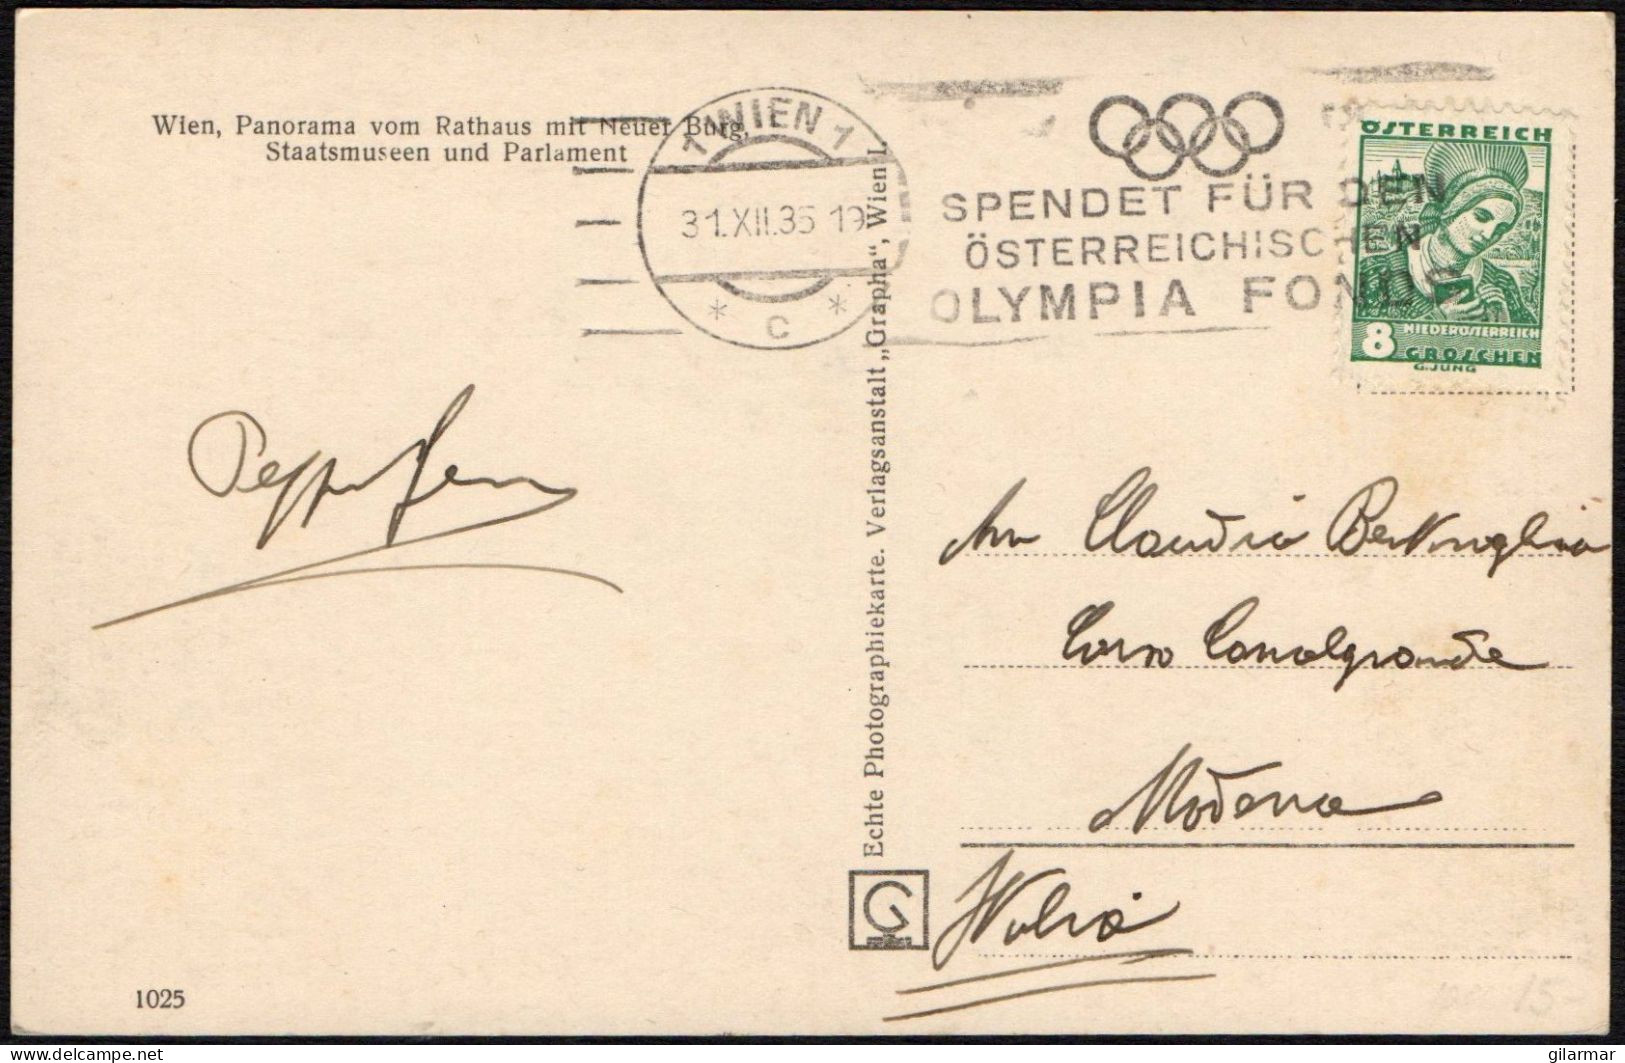 OLYMPIC GAMES 1936 - AUSTRIA WIEN 1 C 1935 - DONATE TO THE AUSTRIAN OLYMPIC FUND - MAILED POSTCARD - M - Verano 1936: Berlin